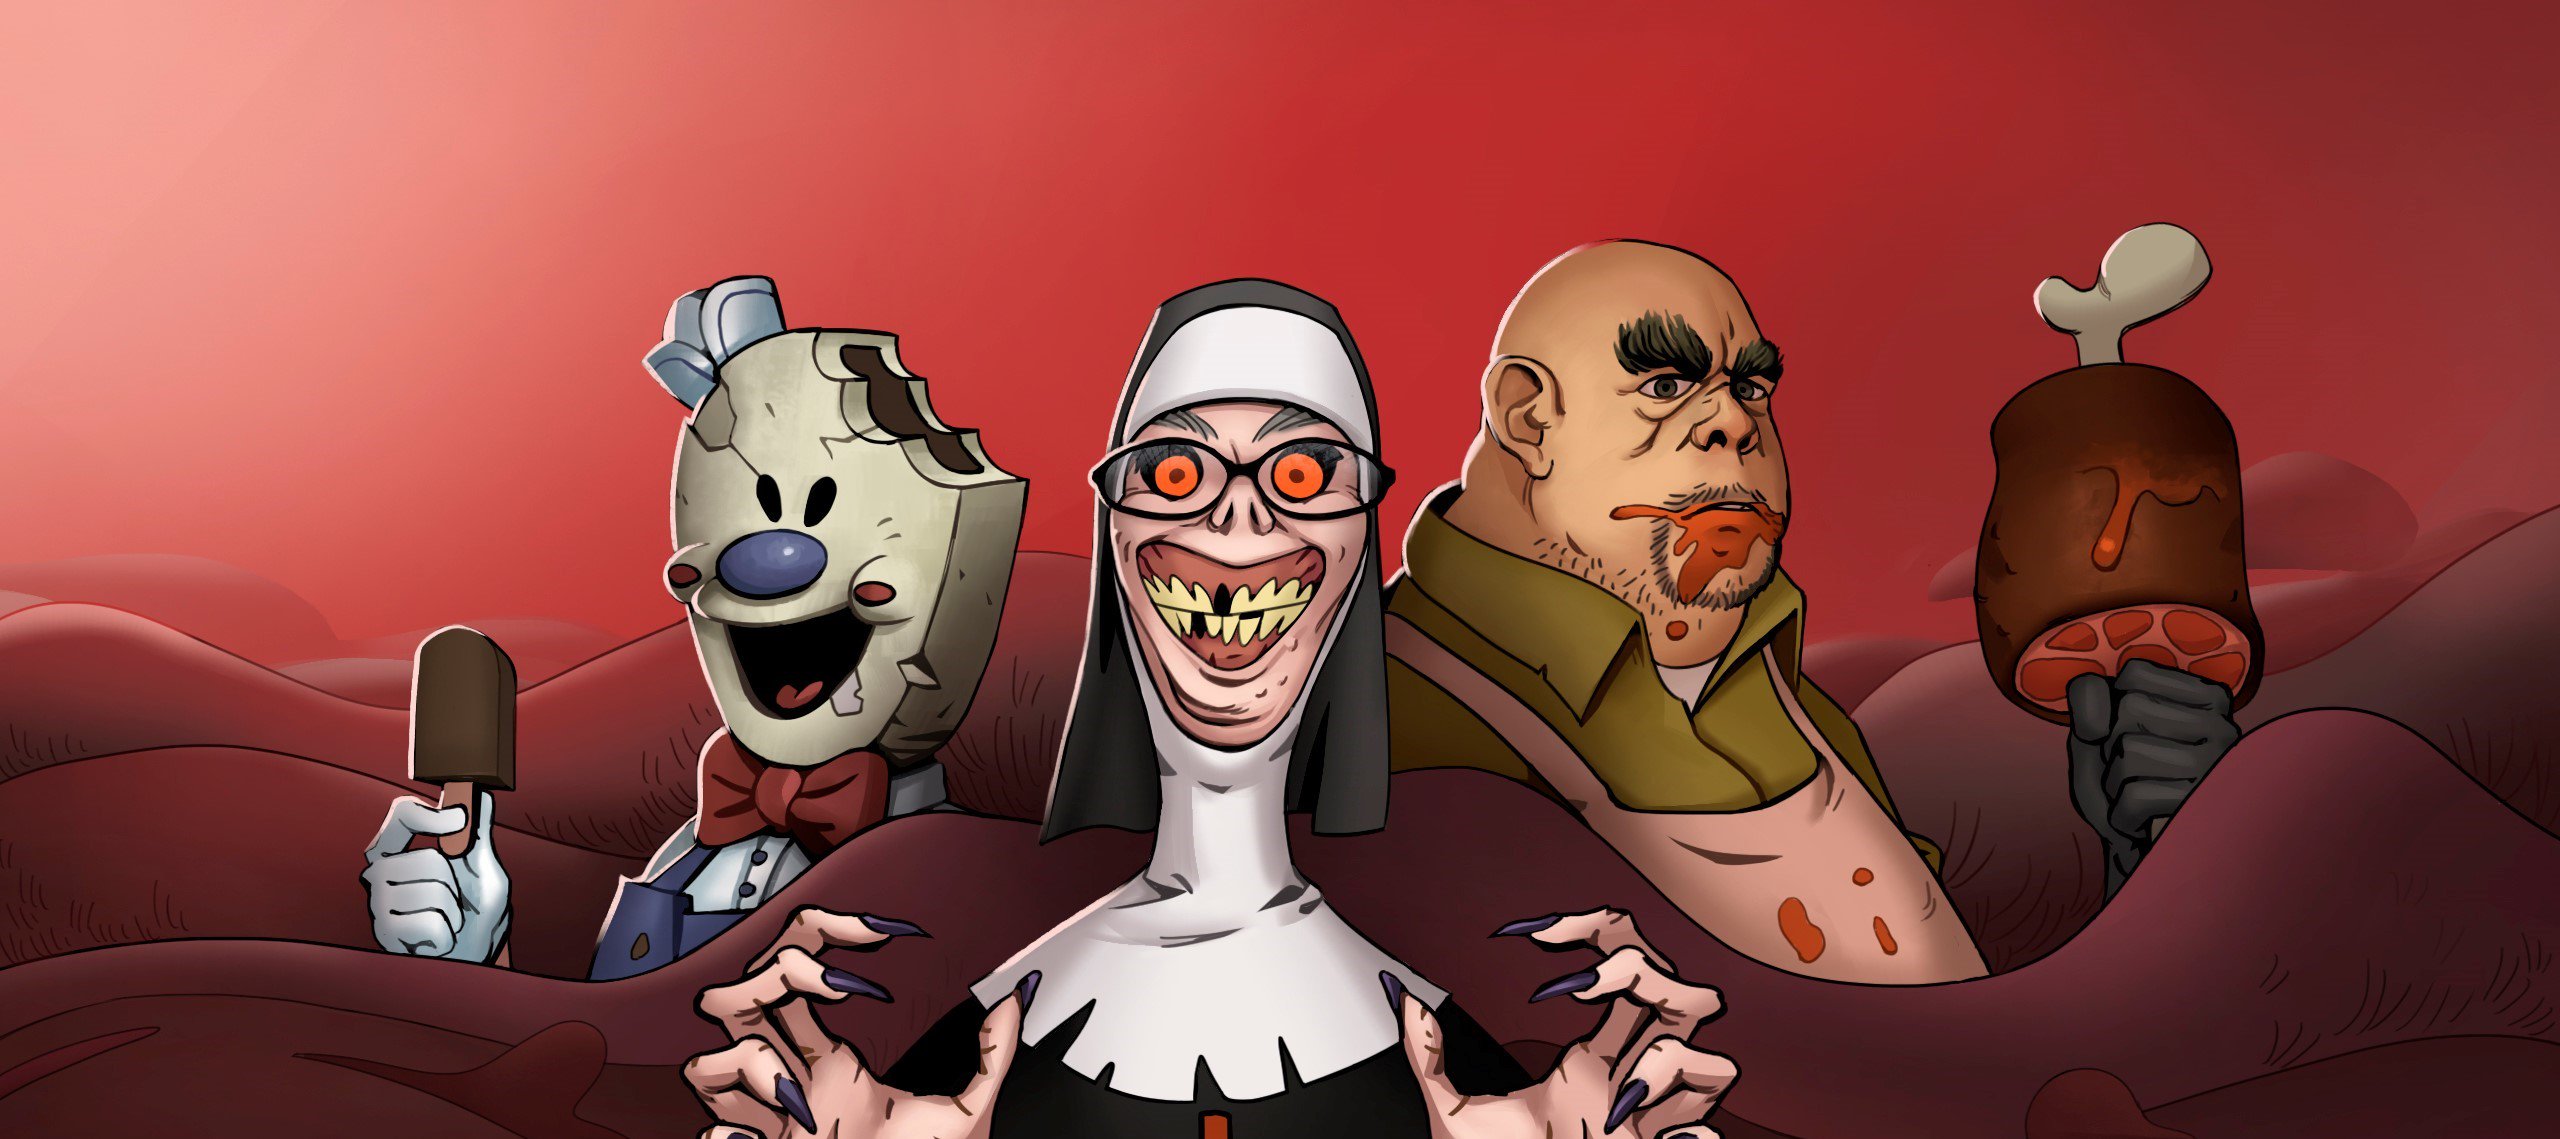 Download Ice Scream 8 Evil Nun APK v1.0 For Android